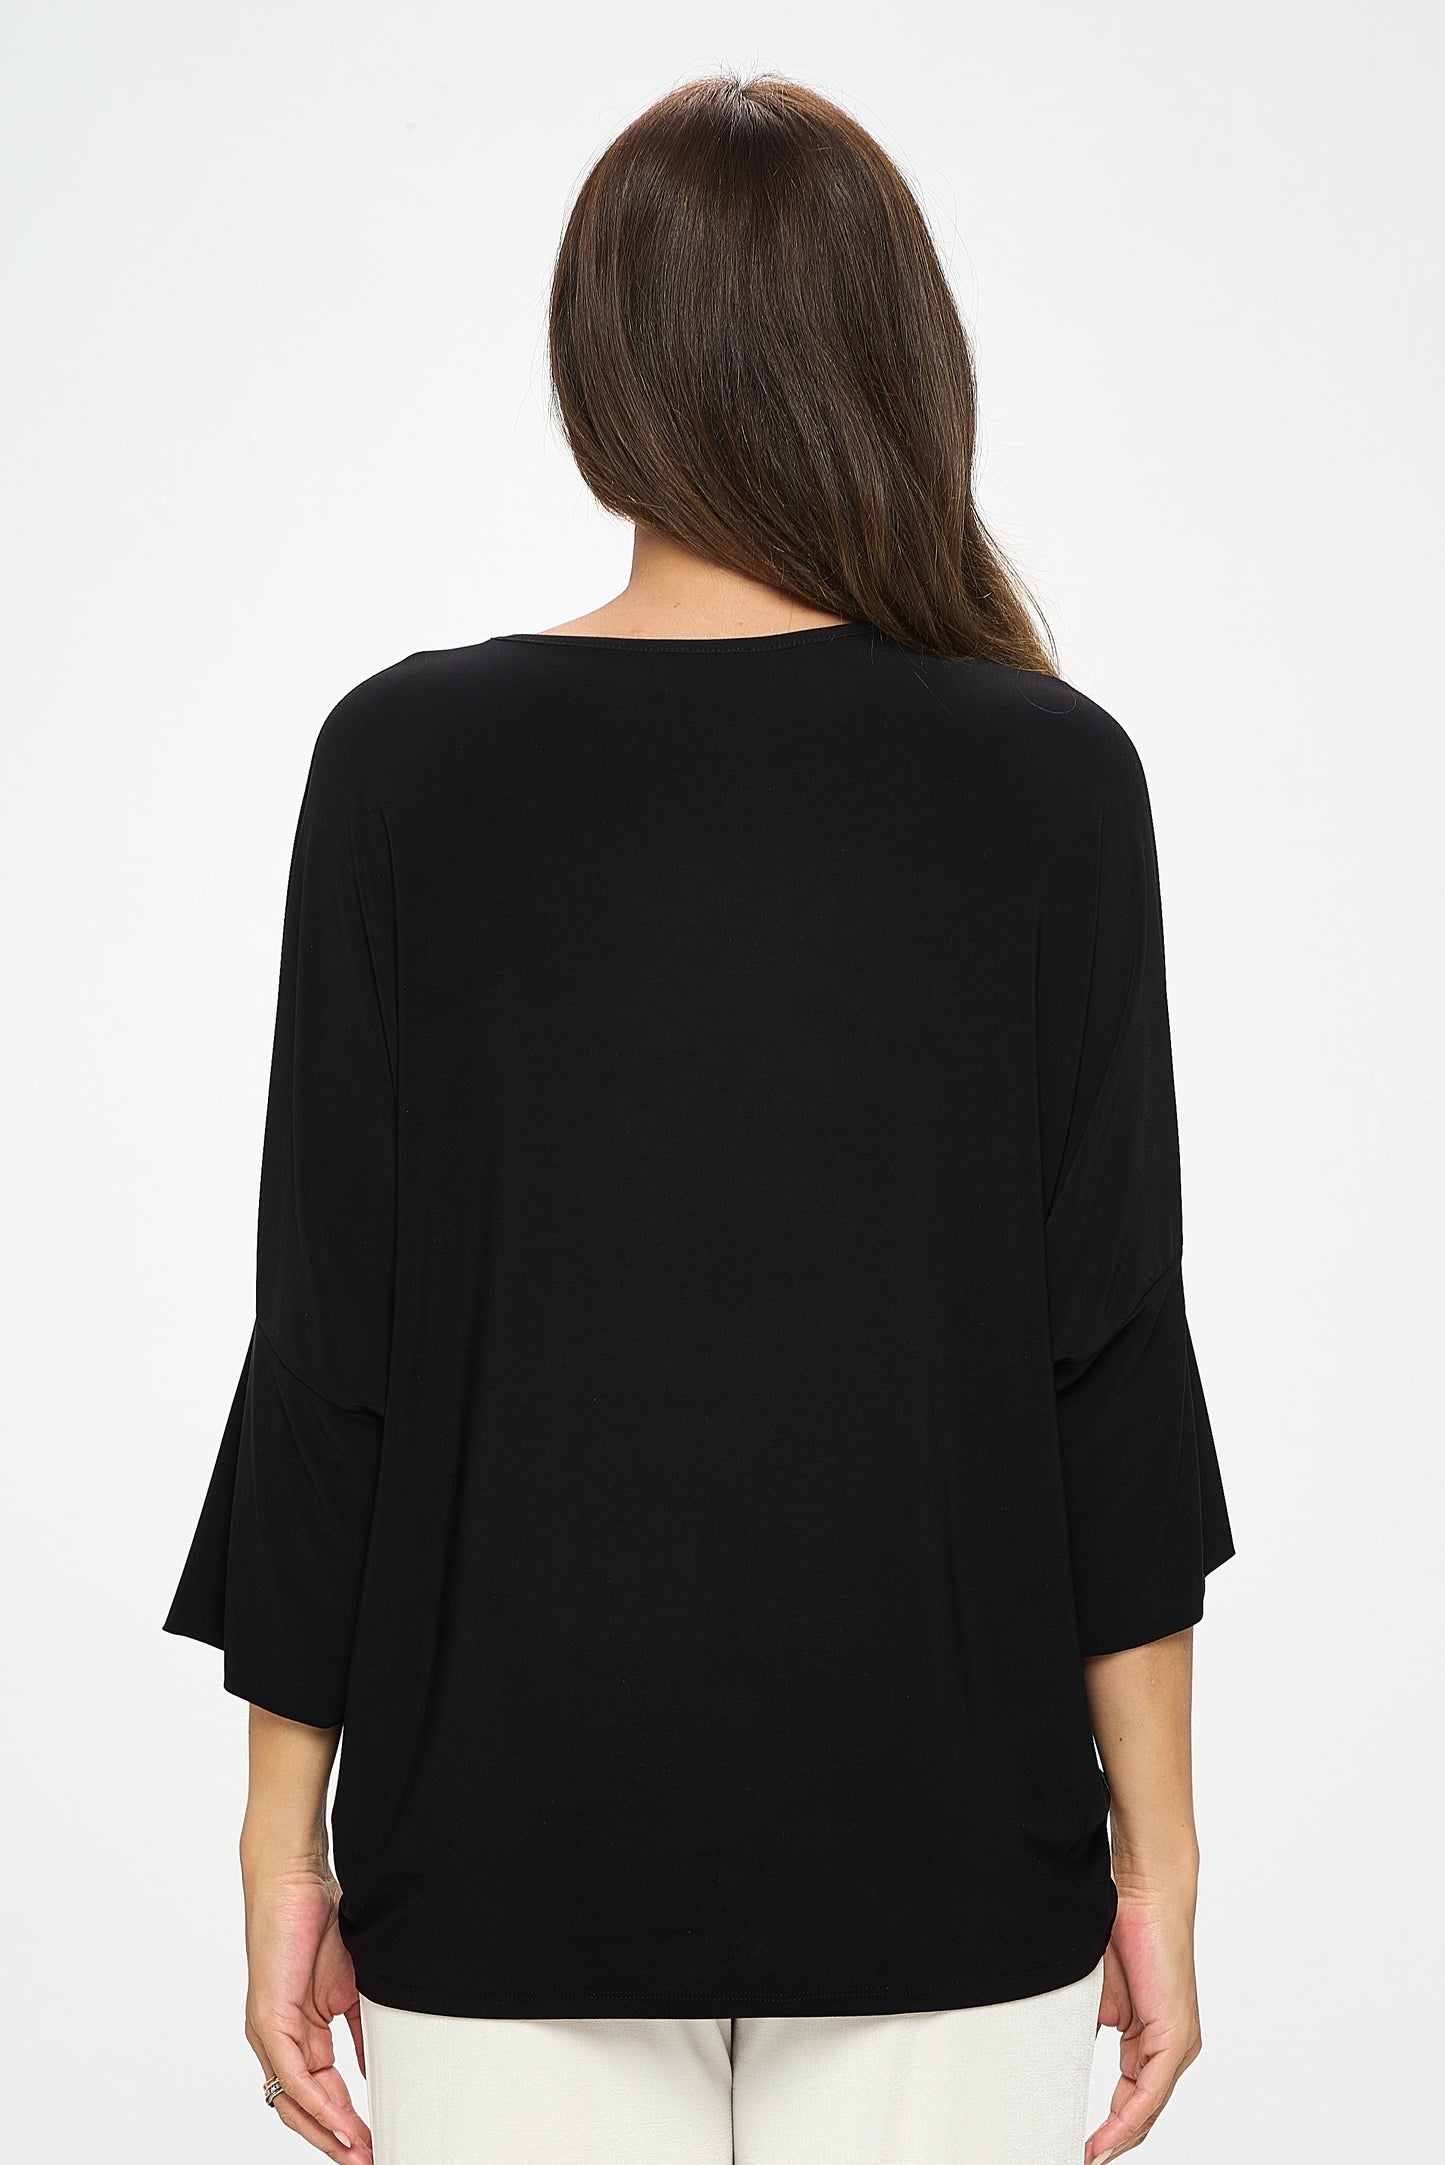 Round Neck Contrast Top with Quarter Sleeve-3099HT-QRP1-C-W394